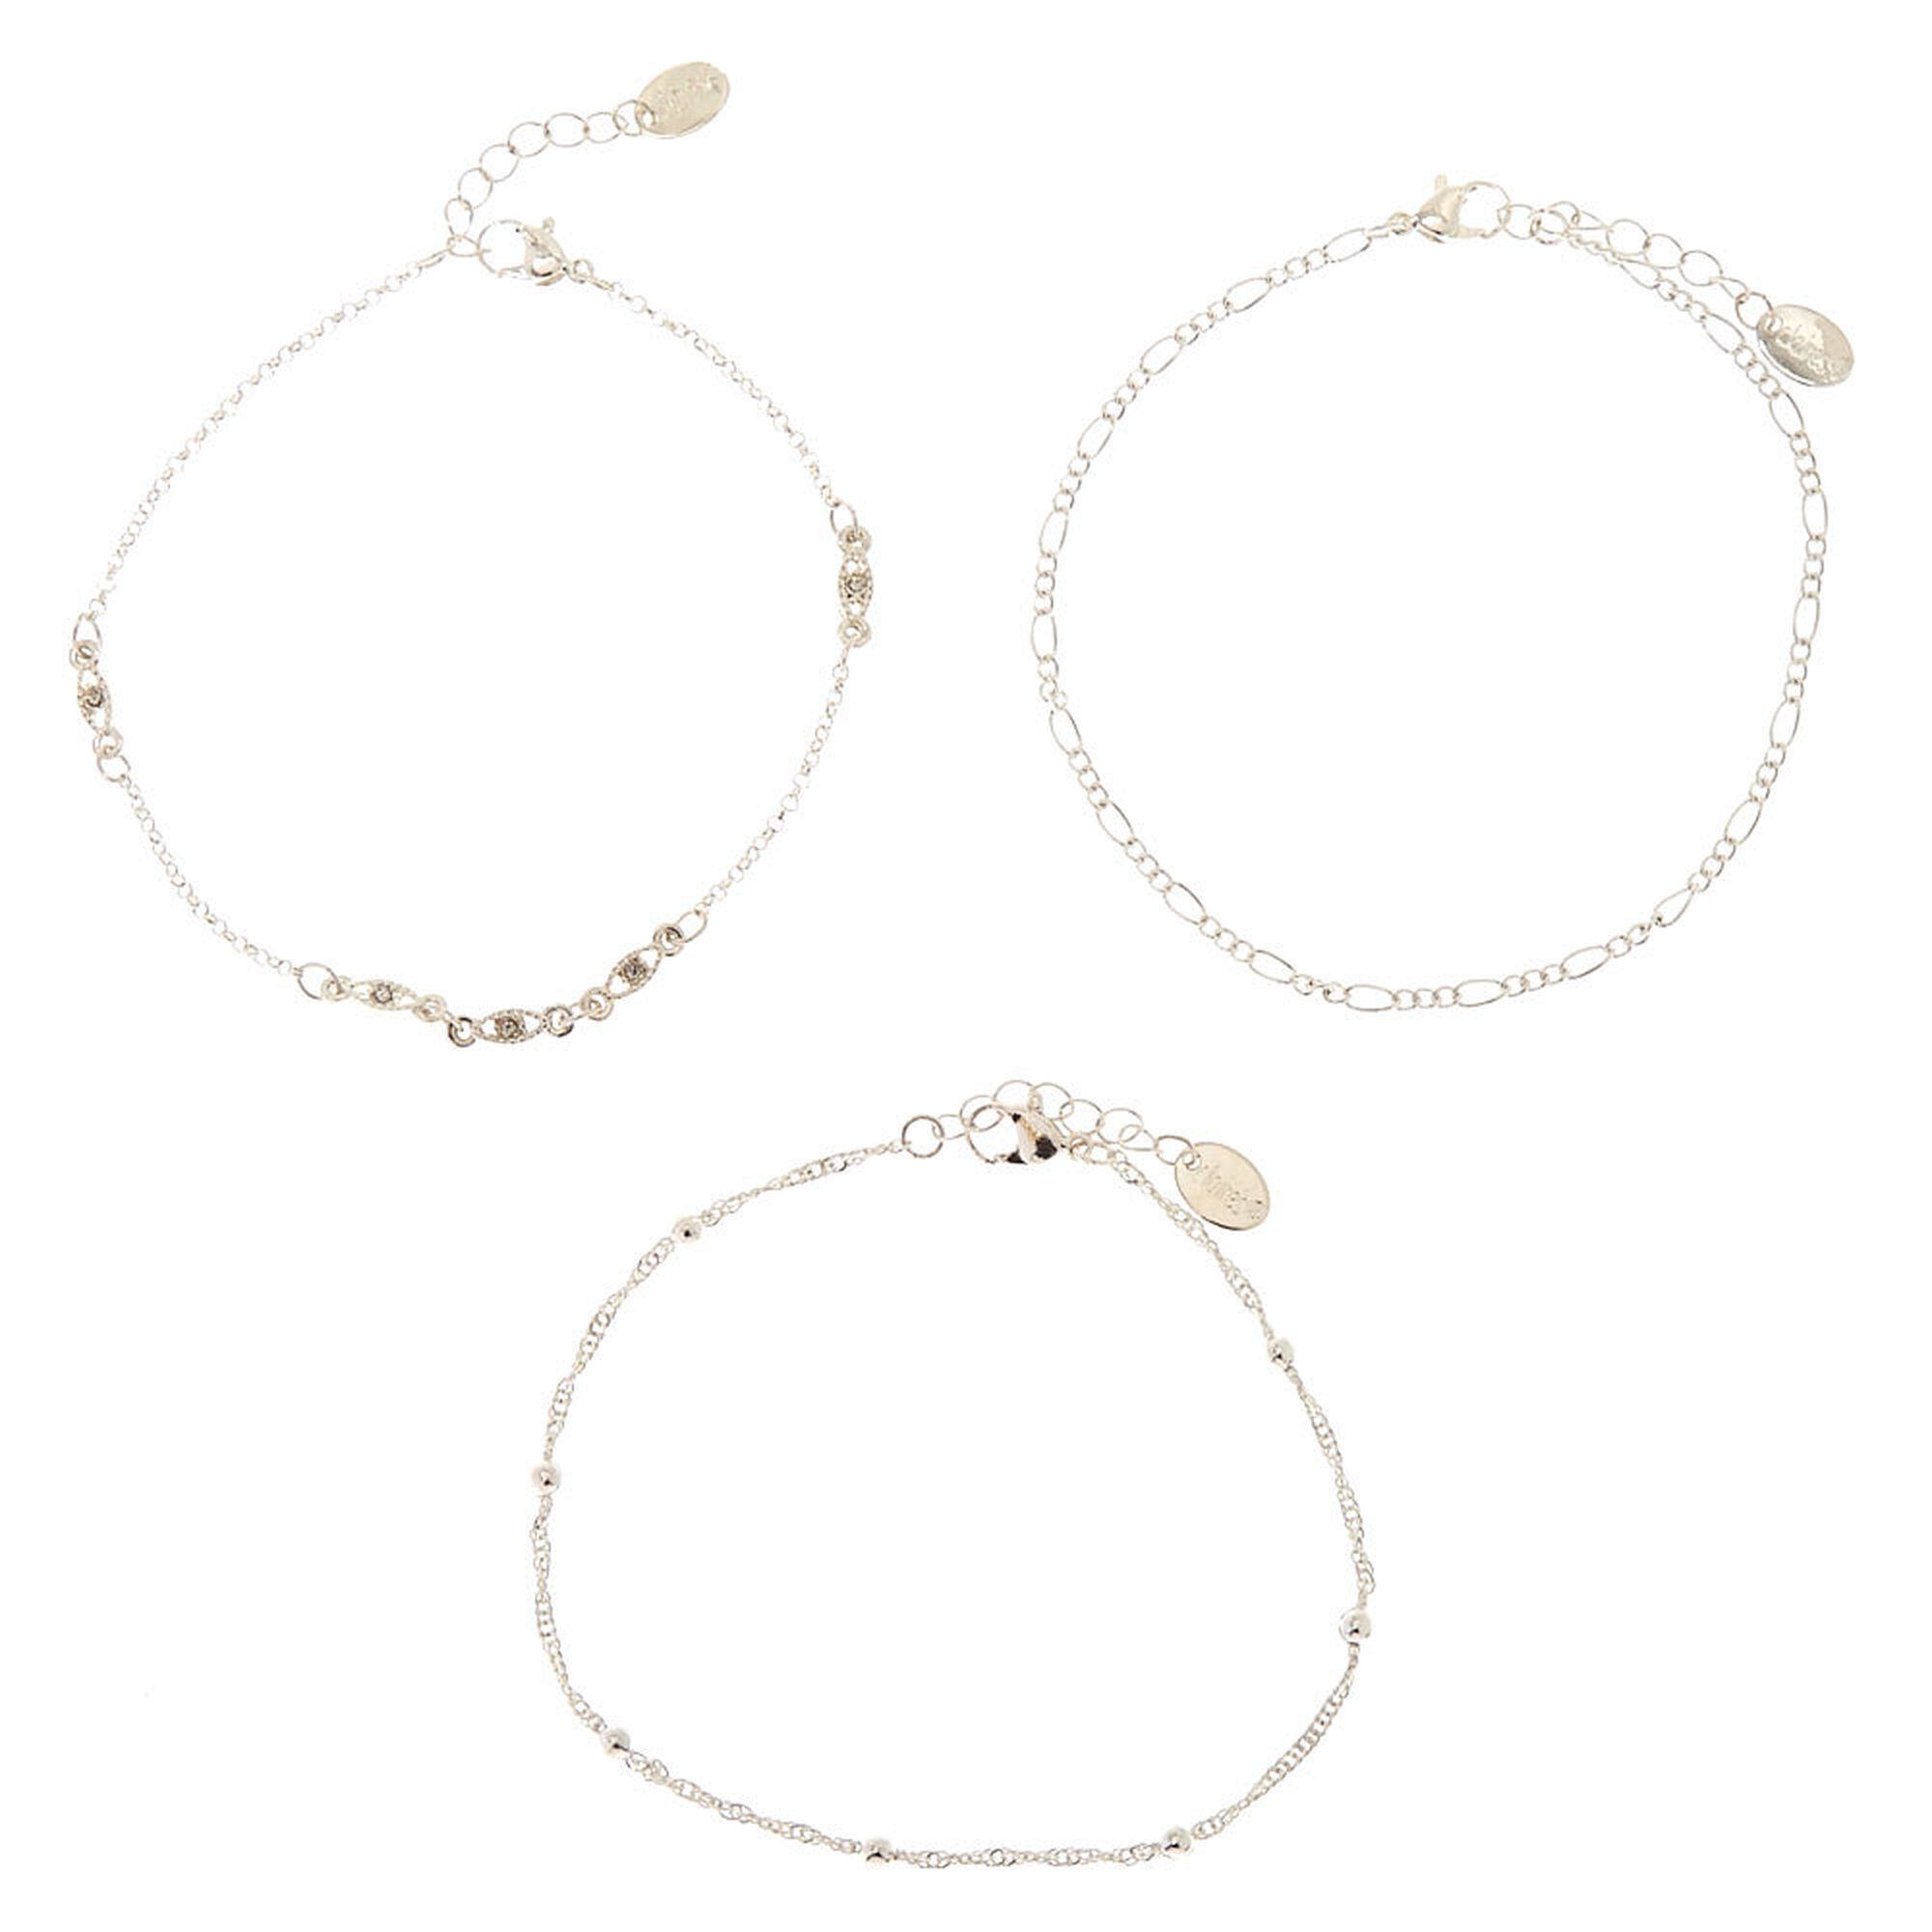 View Claires Tone Simple Beaded Chain Anklets 3 Pack Silver information